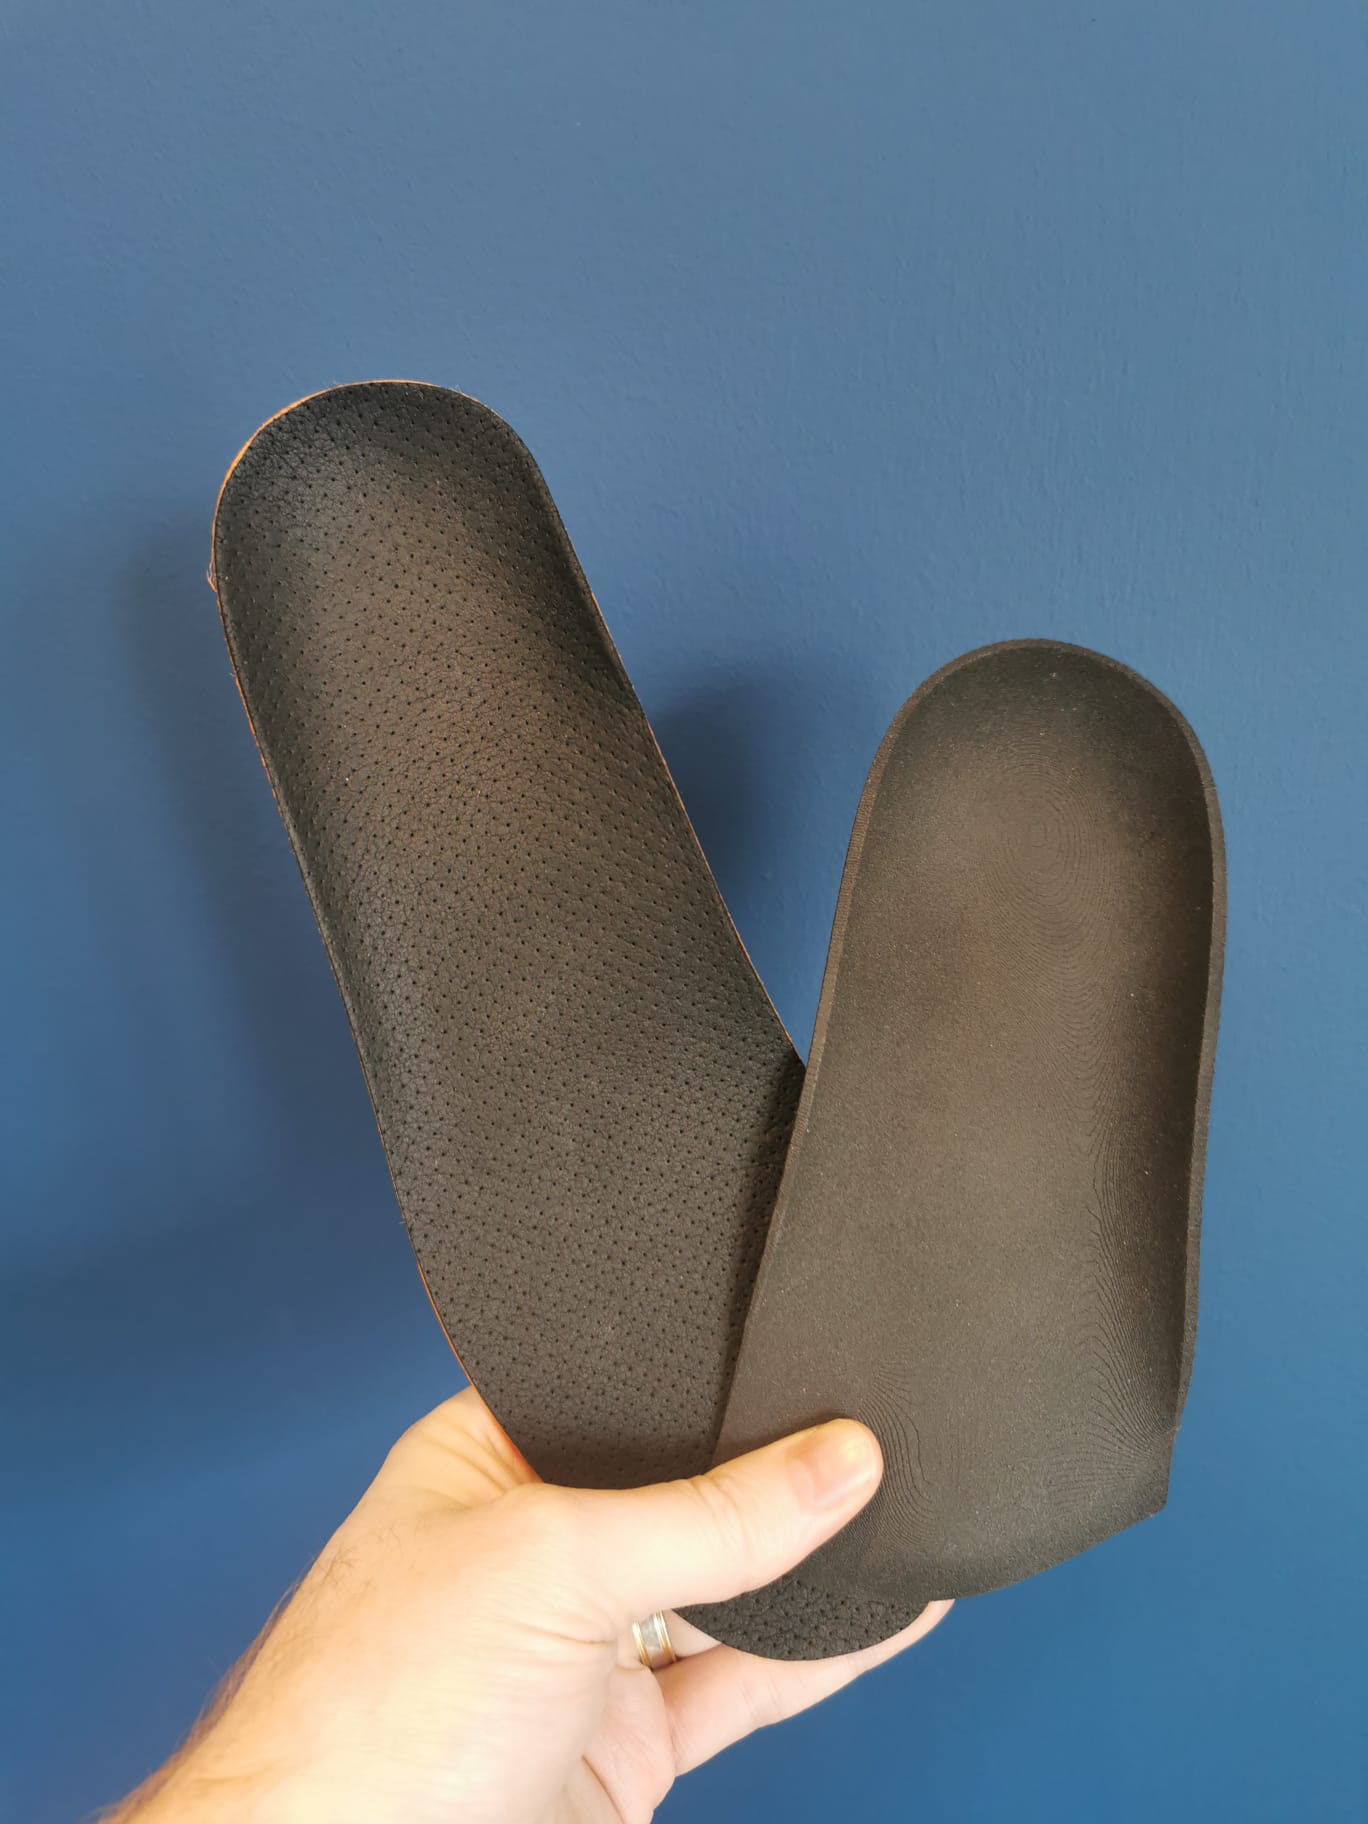 Functional Foot Orthotic and Accommodative Orthotic